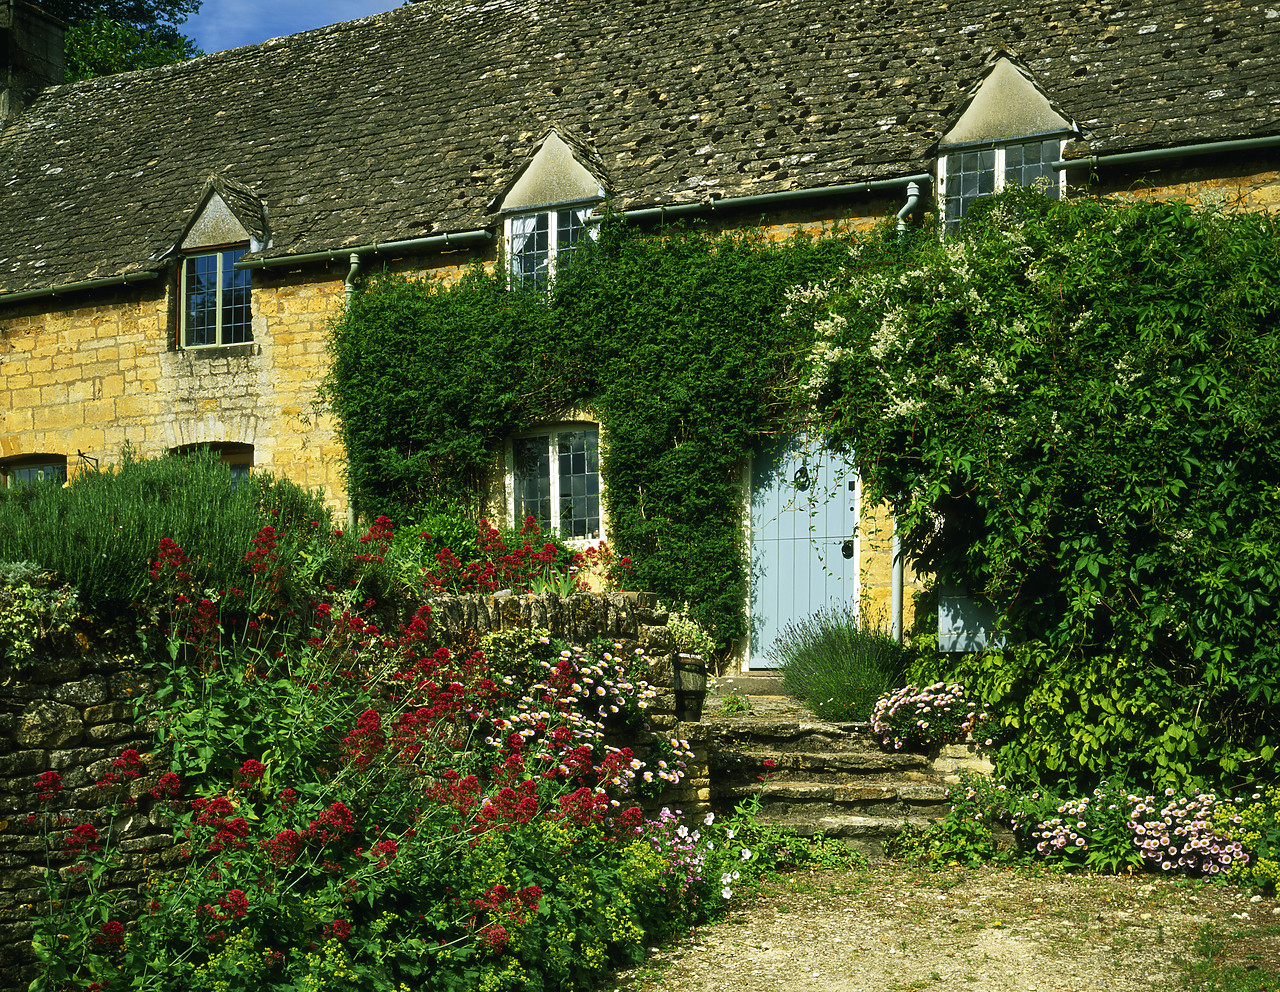 #030230-1 - Cotswold Cottage & Garden, Bourton-on-the-Hill, Gloucestershire, England